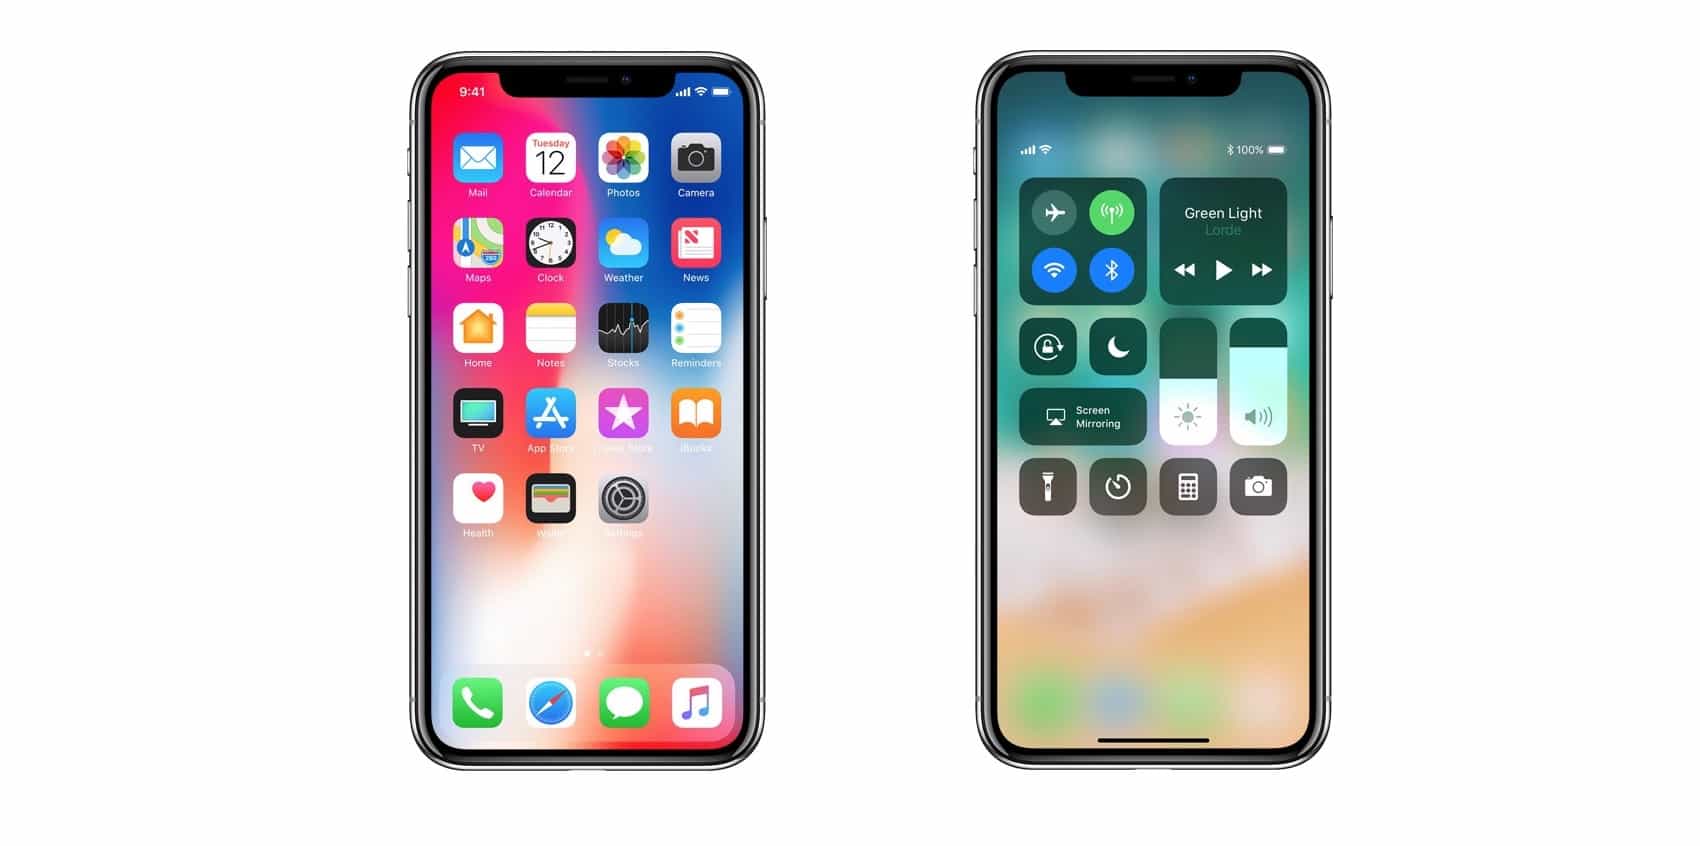 iPhone x battery percentage control center